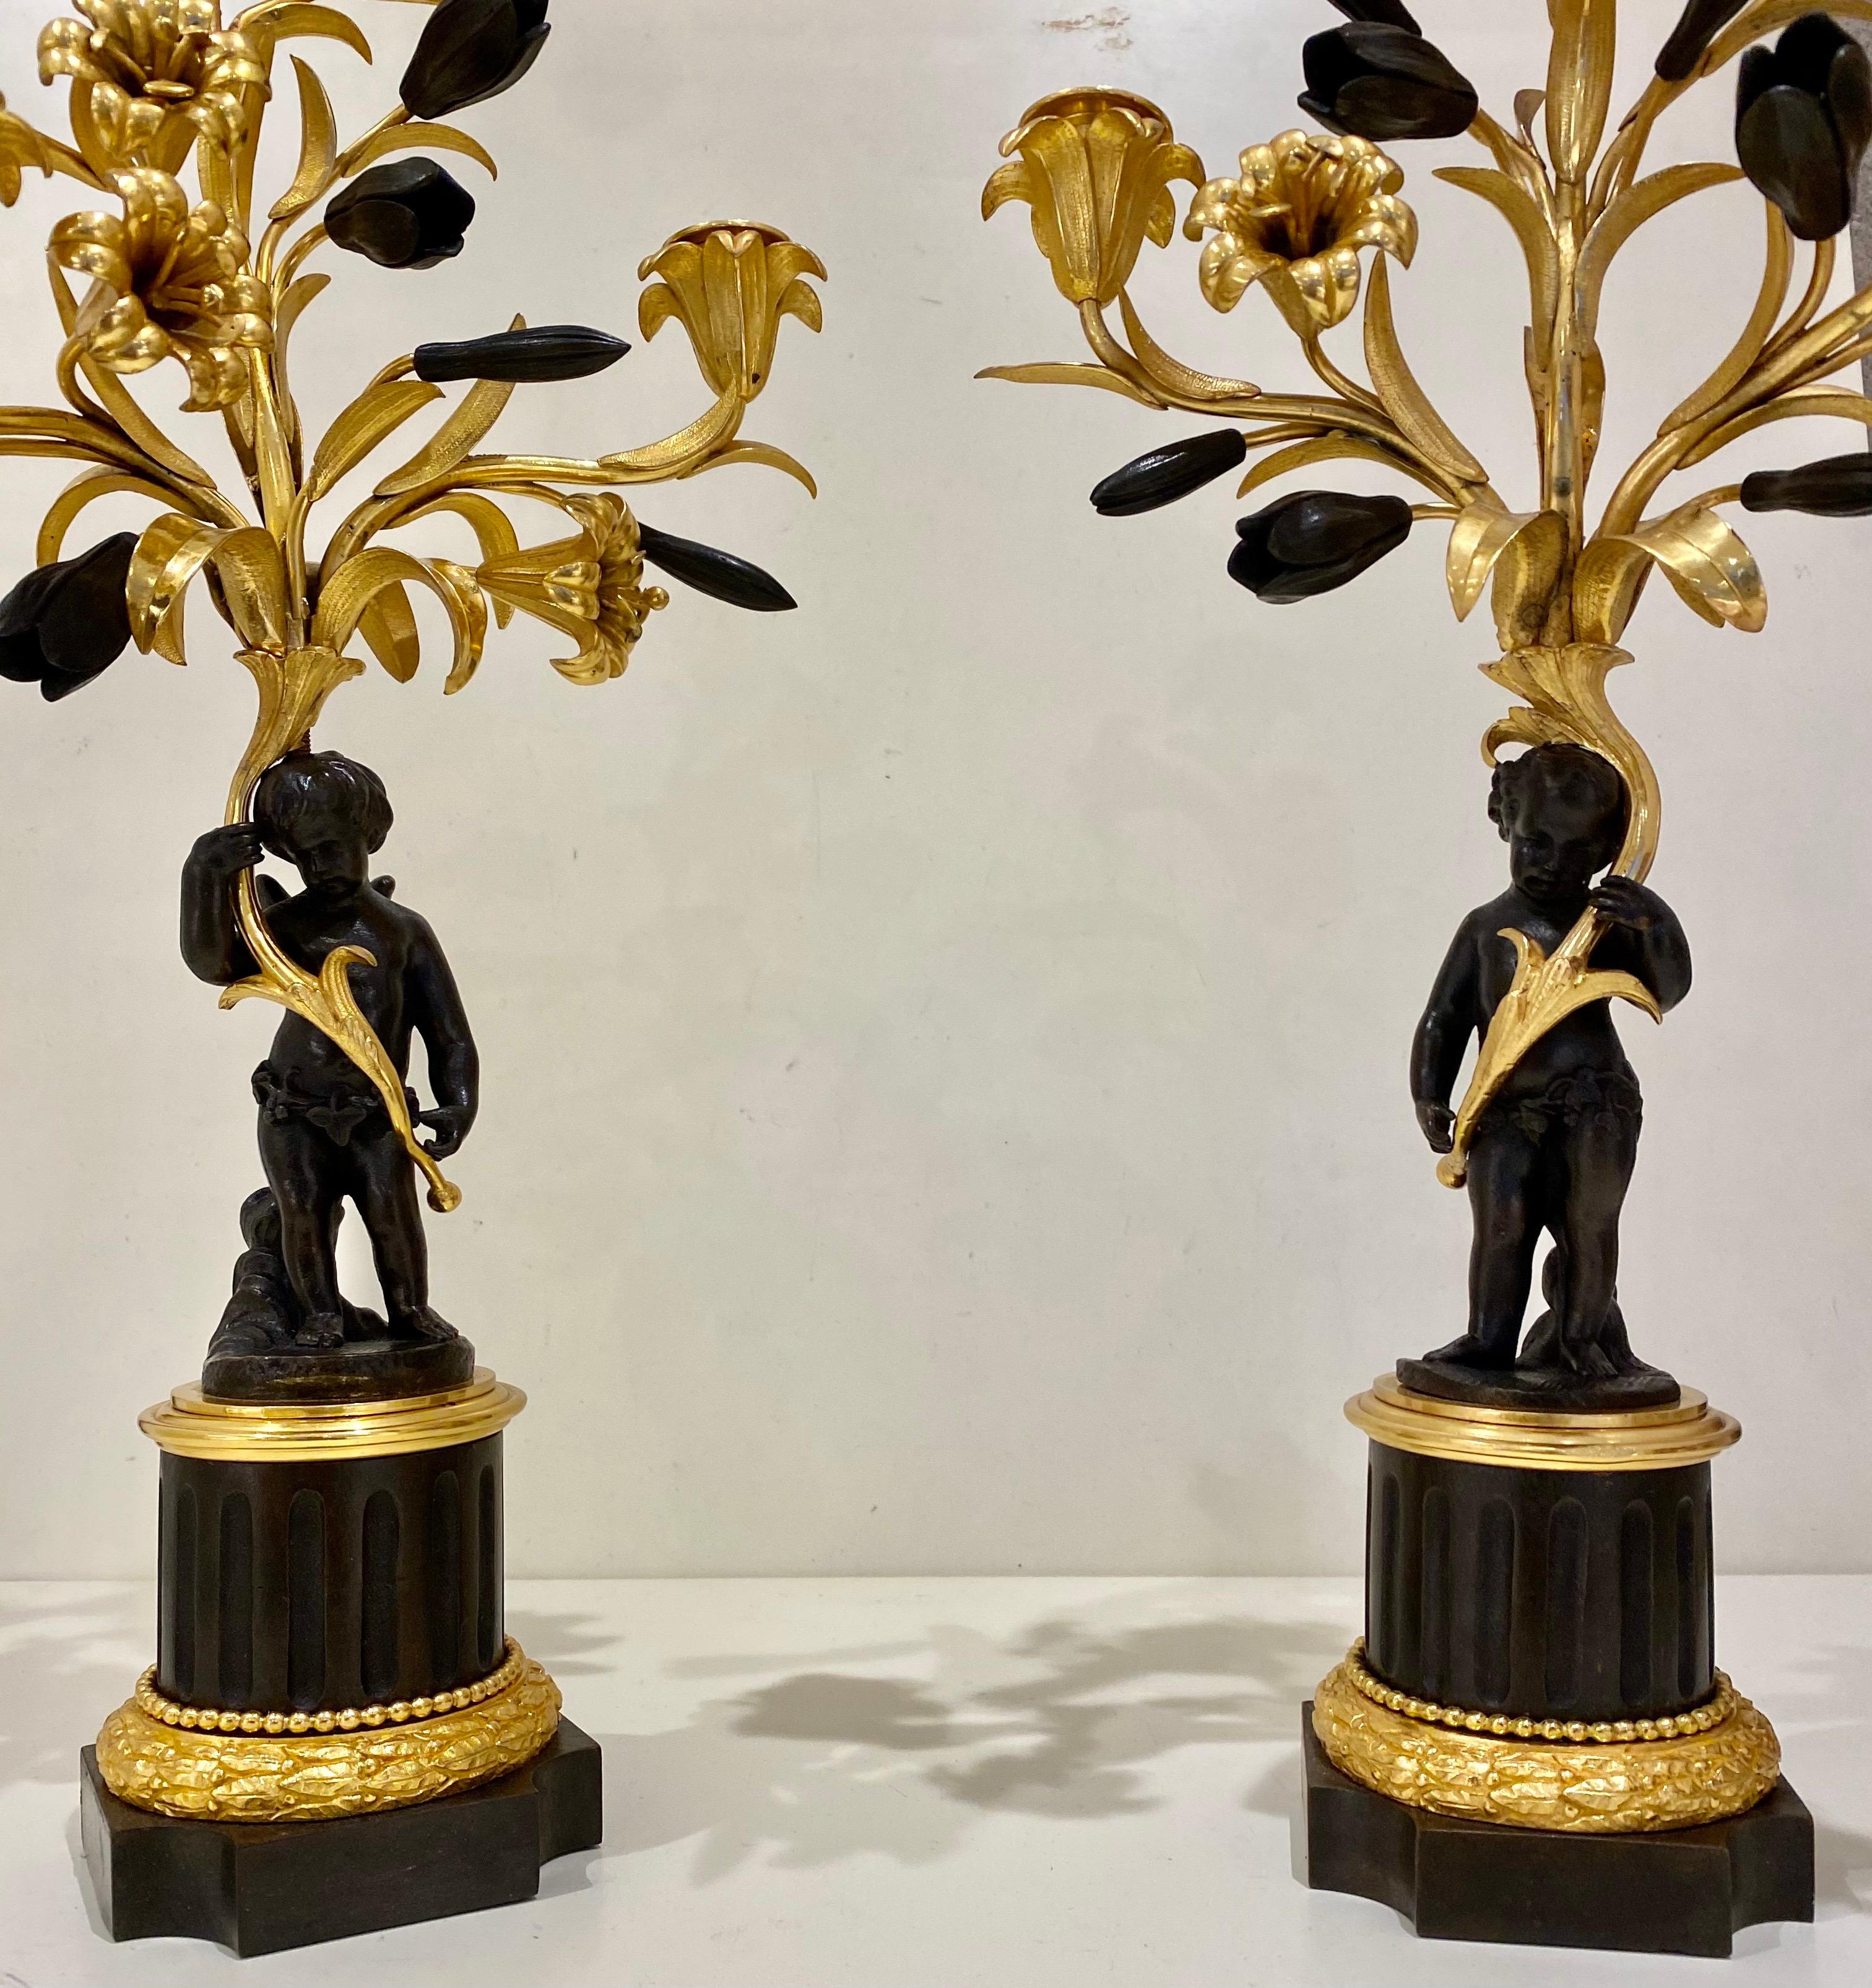 A pair of grand tour two tone bronze Cherub candelabra, French, Circa 19th century, The three branches each with detachable drip-pans. Circa 1880 and measuring 19 inches ( 49.5 cms) High by 9 inches (19 cms) Wide. 
This pair of 19th century bronze